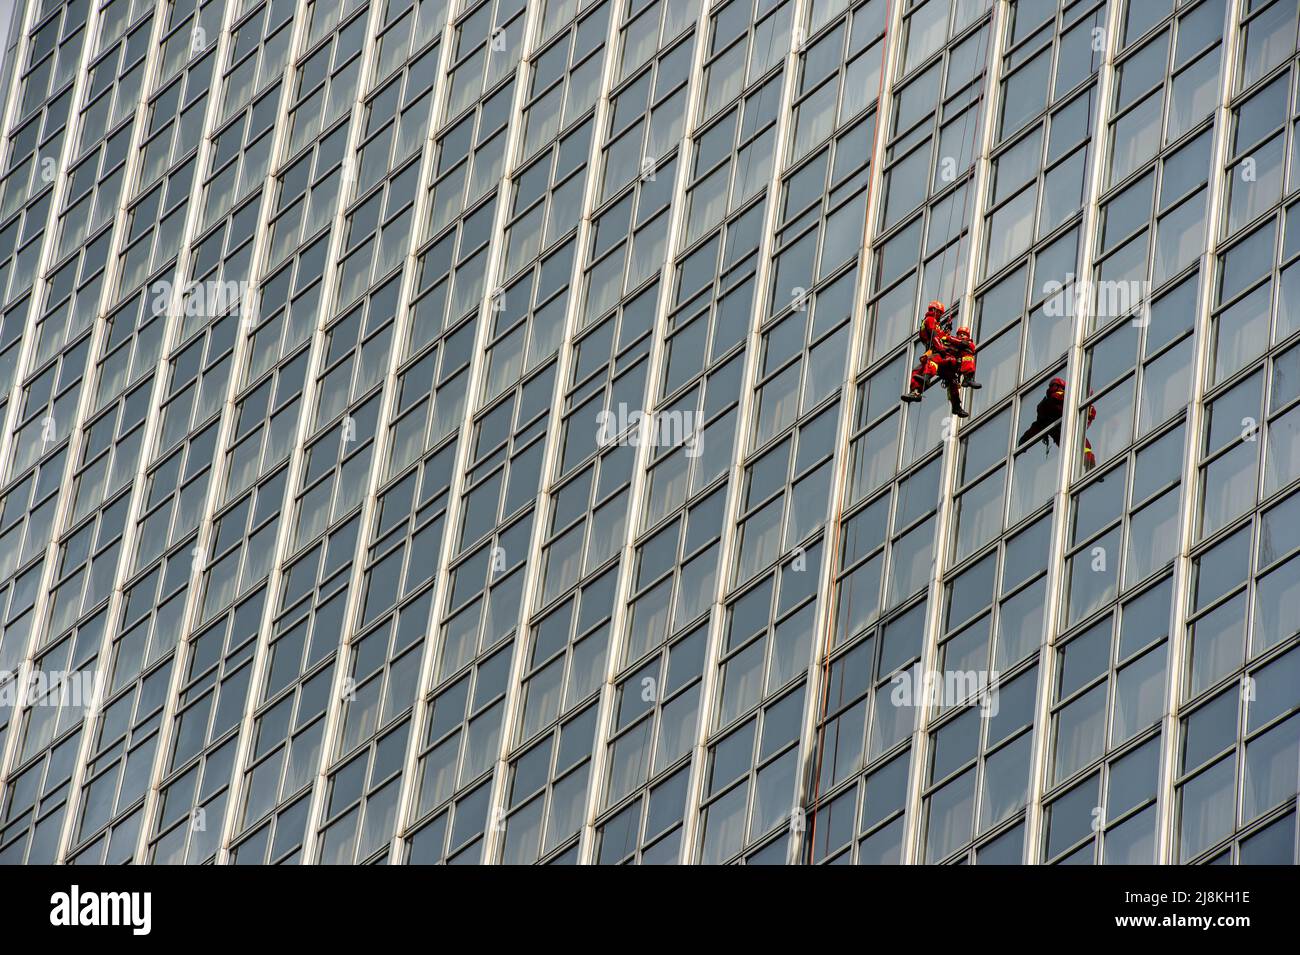 Firefighters scaling the outside of the Park InnHotel in Alexanderplatz, Berlin for the Annual Berlin Firefighter Stair Run Competition. Stock Photo